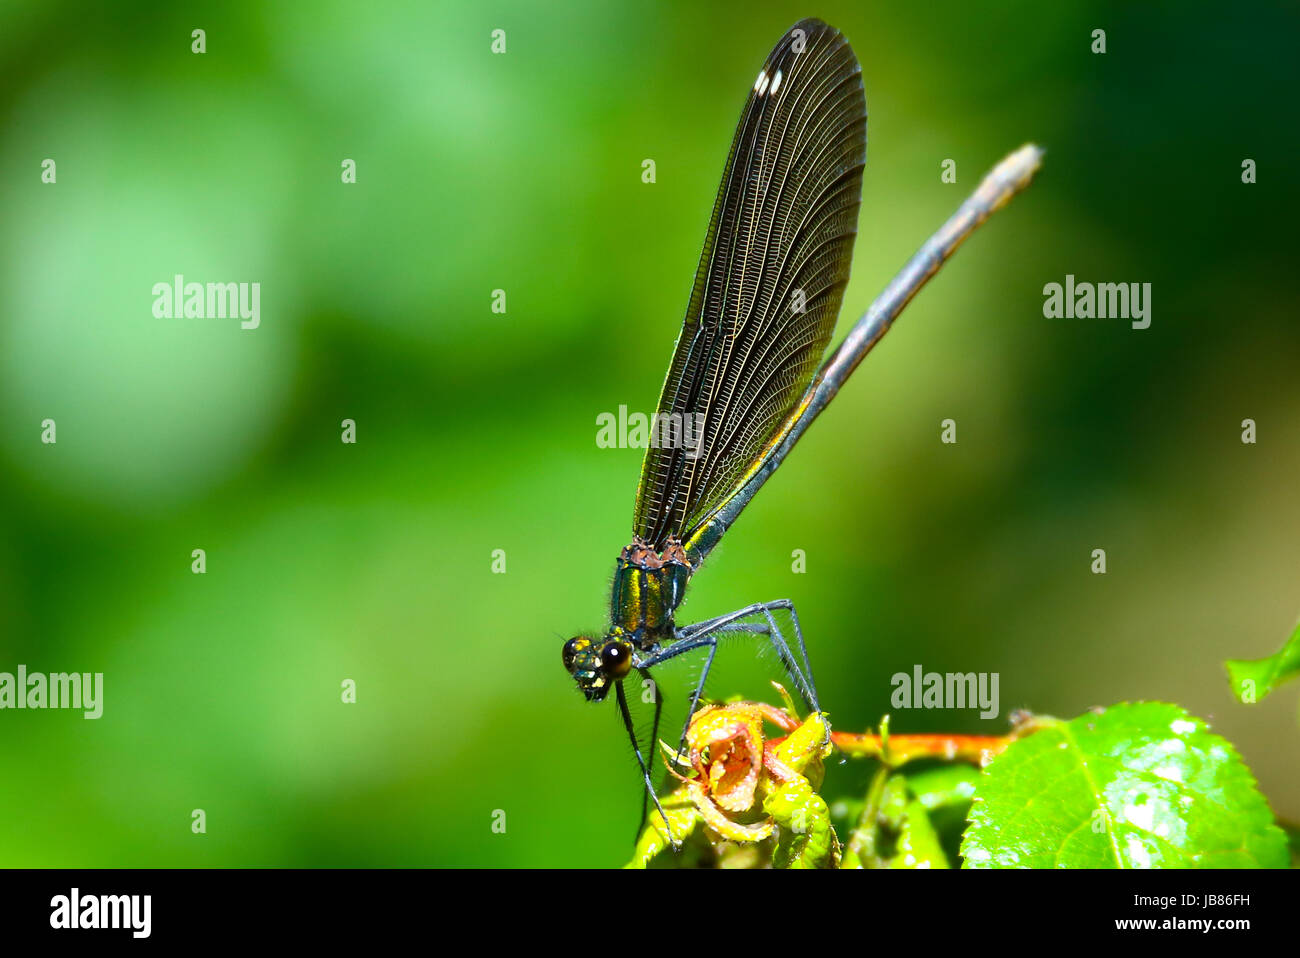 Female beautiful demoiselles hunt for insects Stock Photo